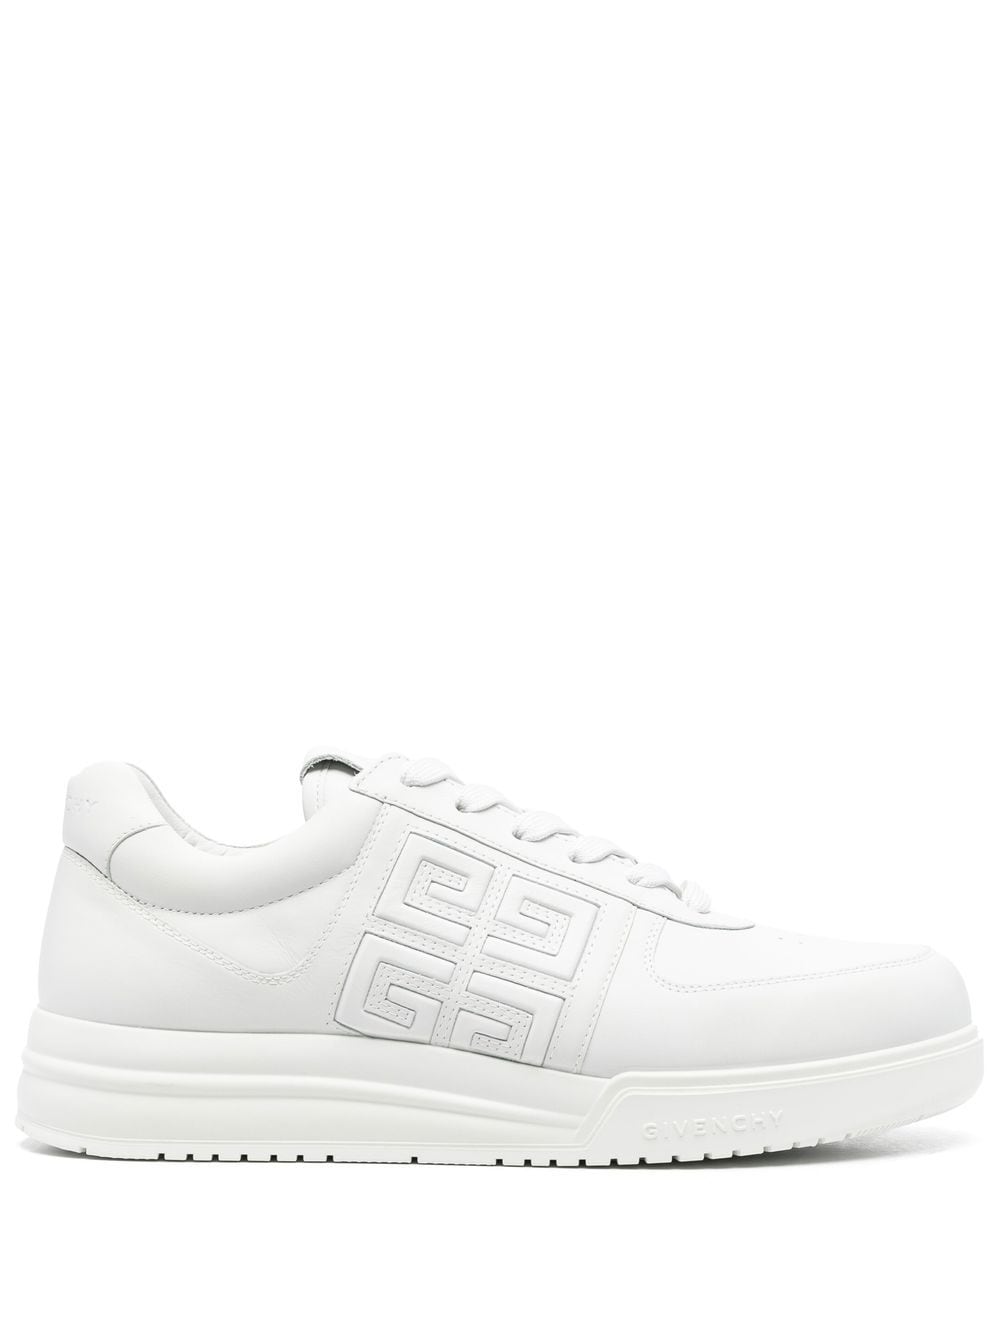 Givenchy monogram-pattern leather sneakers - White von Givenchy